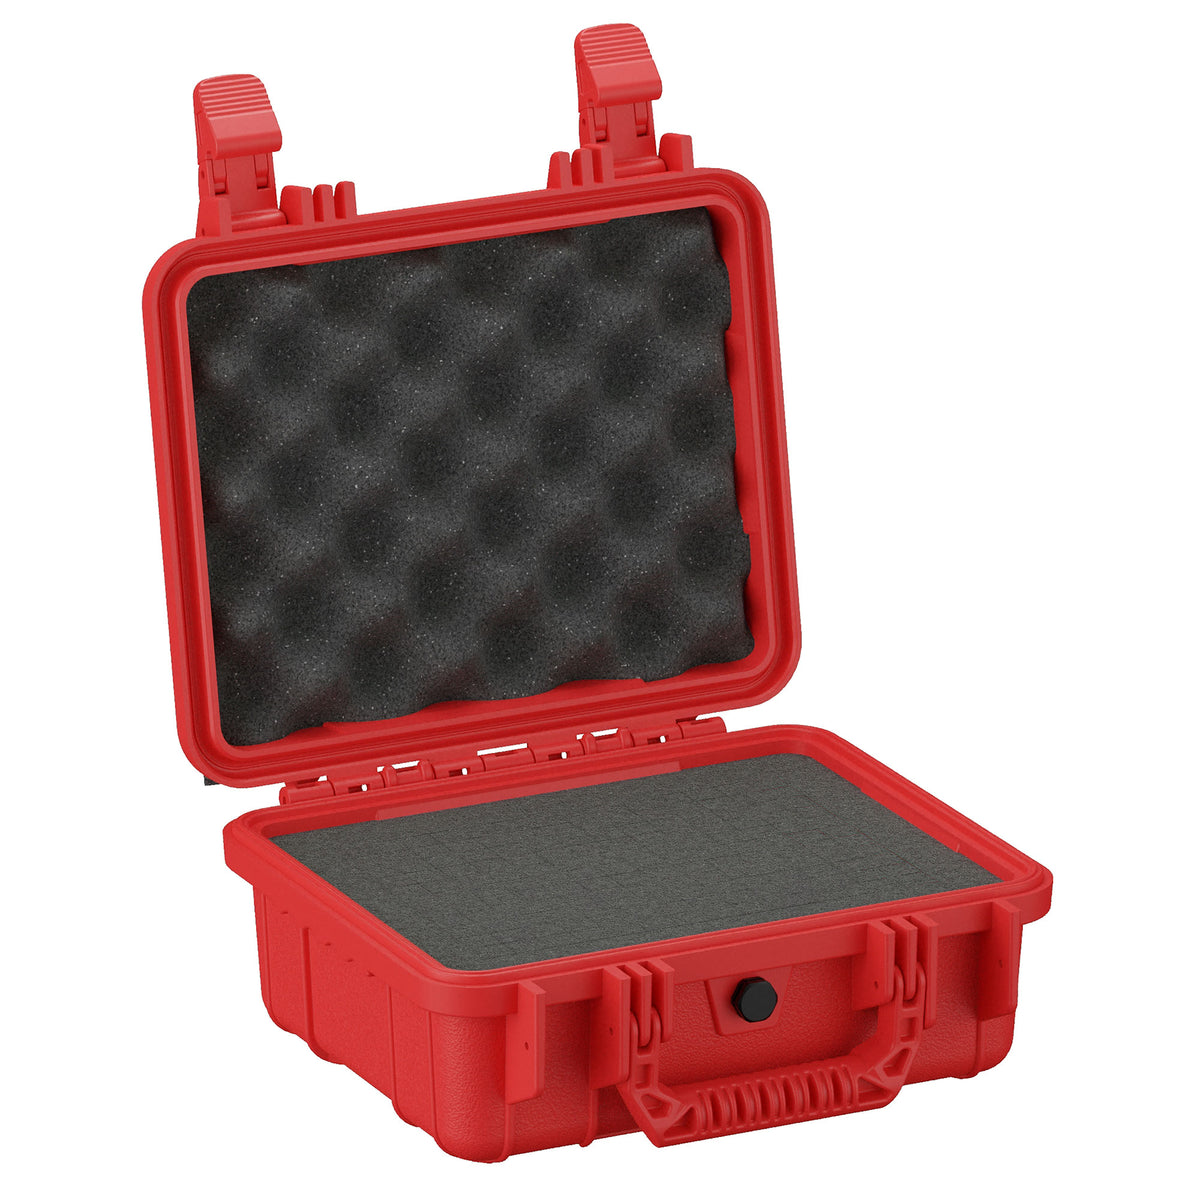 Tactical Shockproof Safety Case Waterproof Lockable Toolbox Airtight  Instrument Case Military Molle System Storage Box Tw